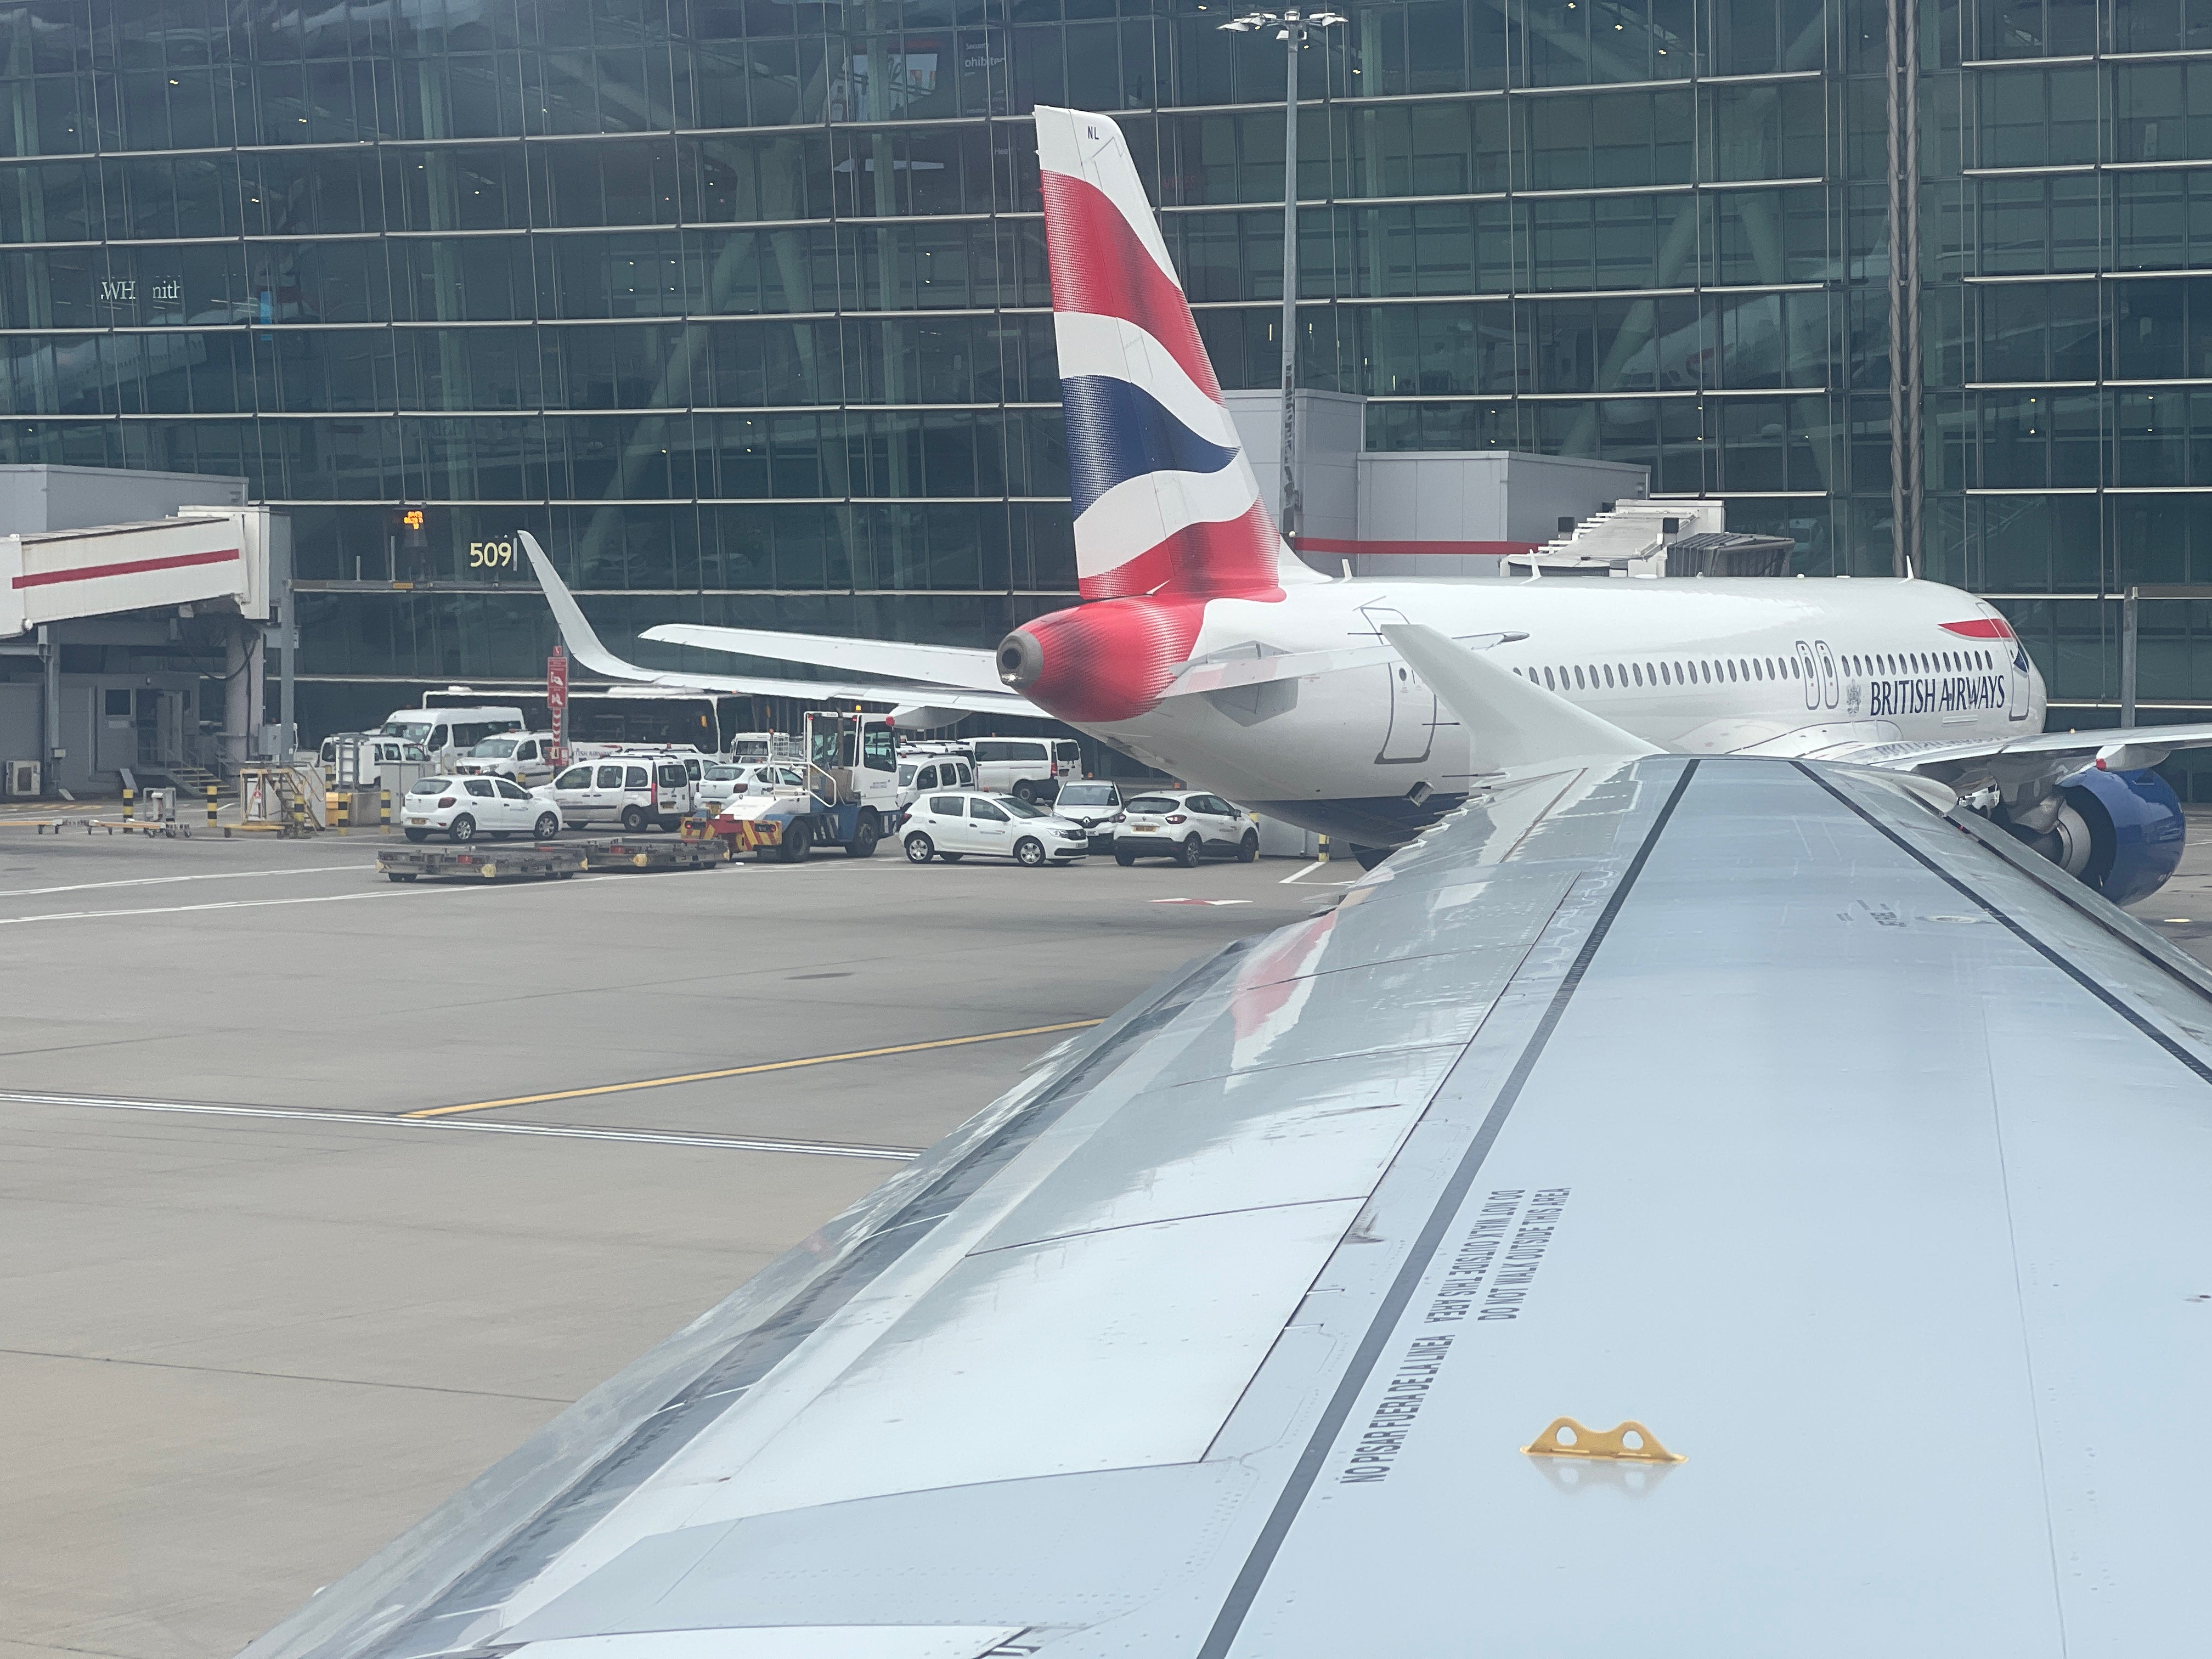 Cancel culture: a British Airways aircraft at Heathrow Terminal 5, from an Iberia aircraft operating a BA flight from London to Rome